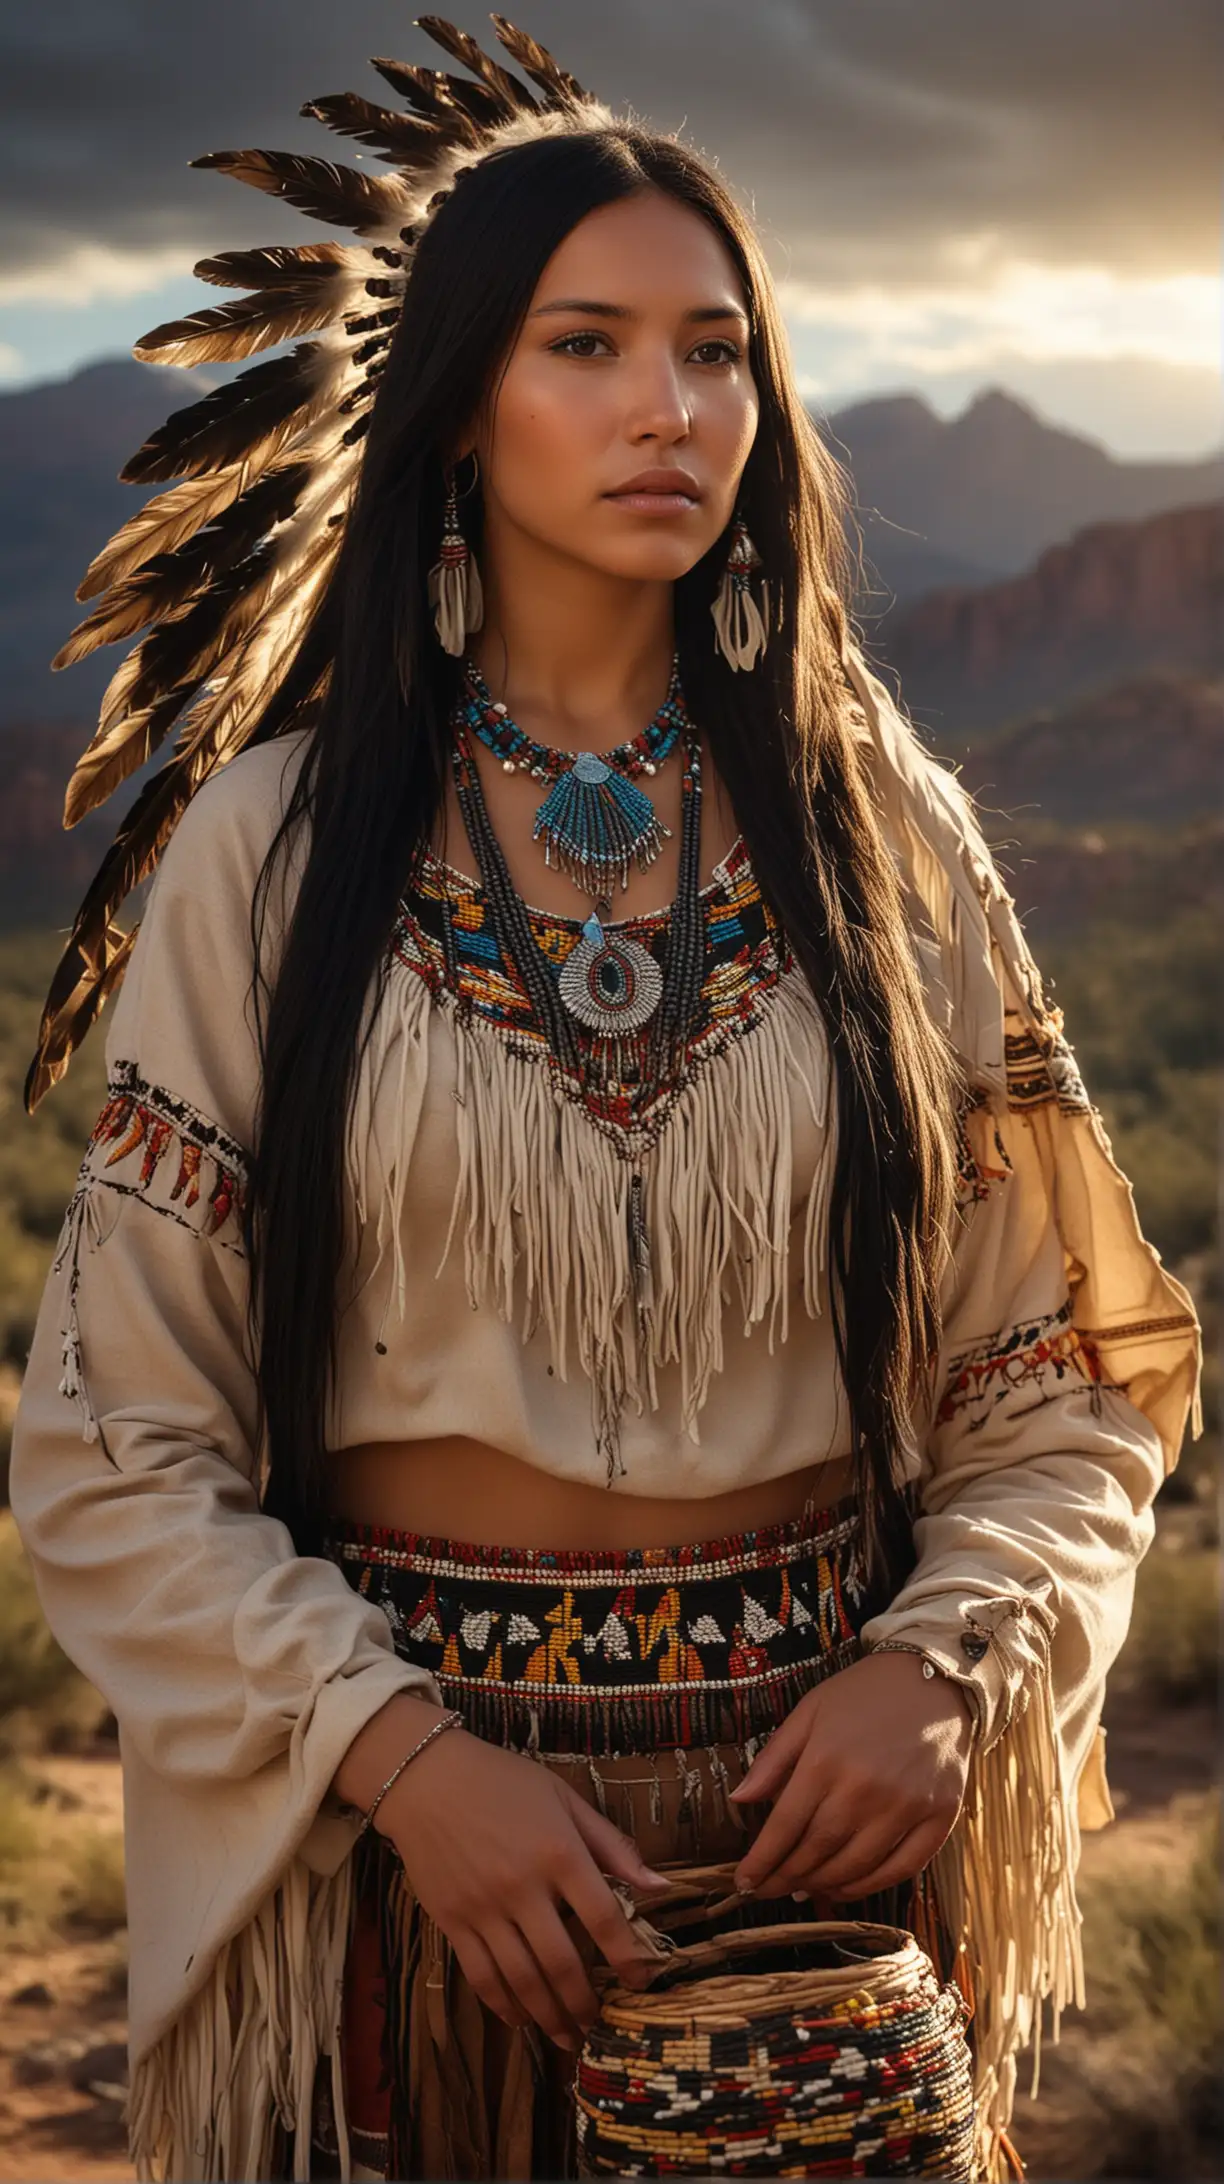 Stunning Apache Girl Grace Strength and Beauty in Traditional Attire